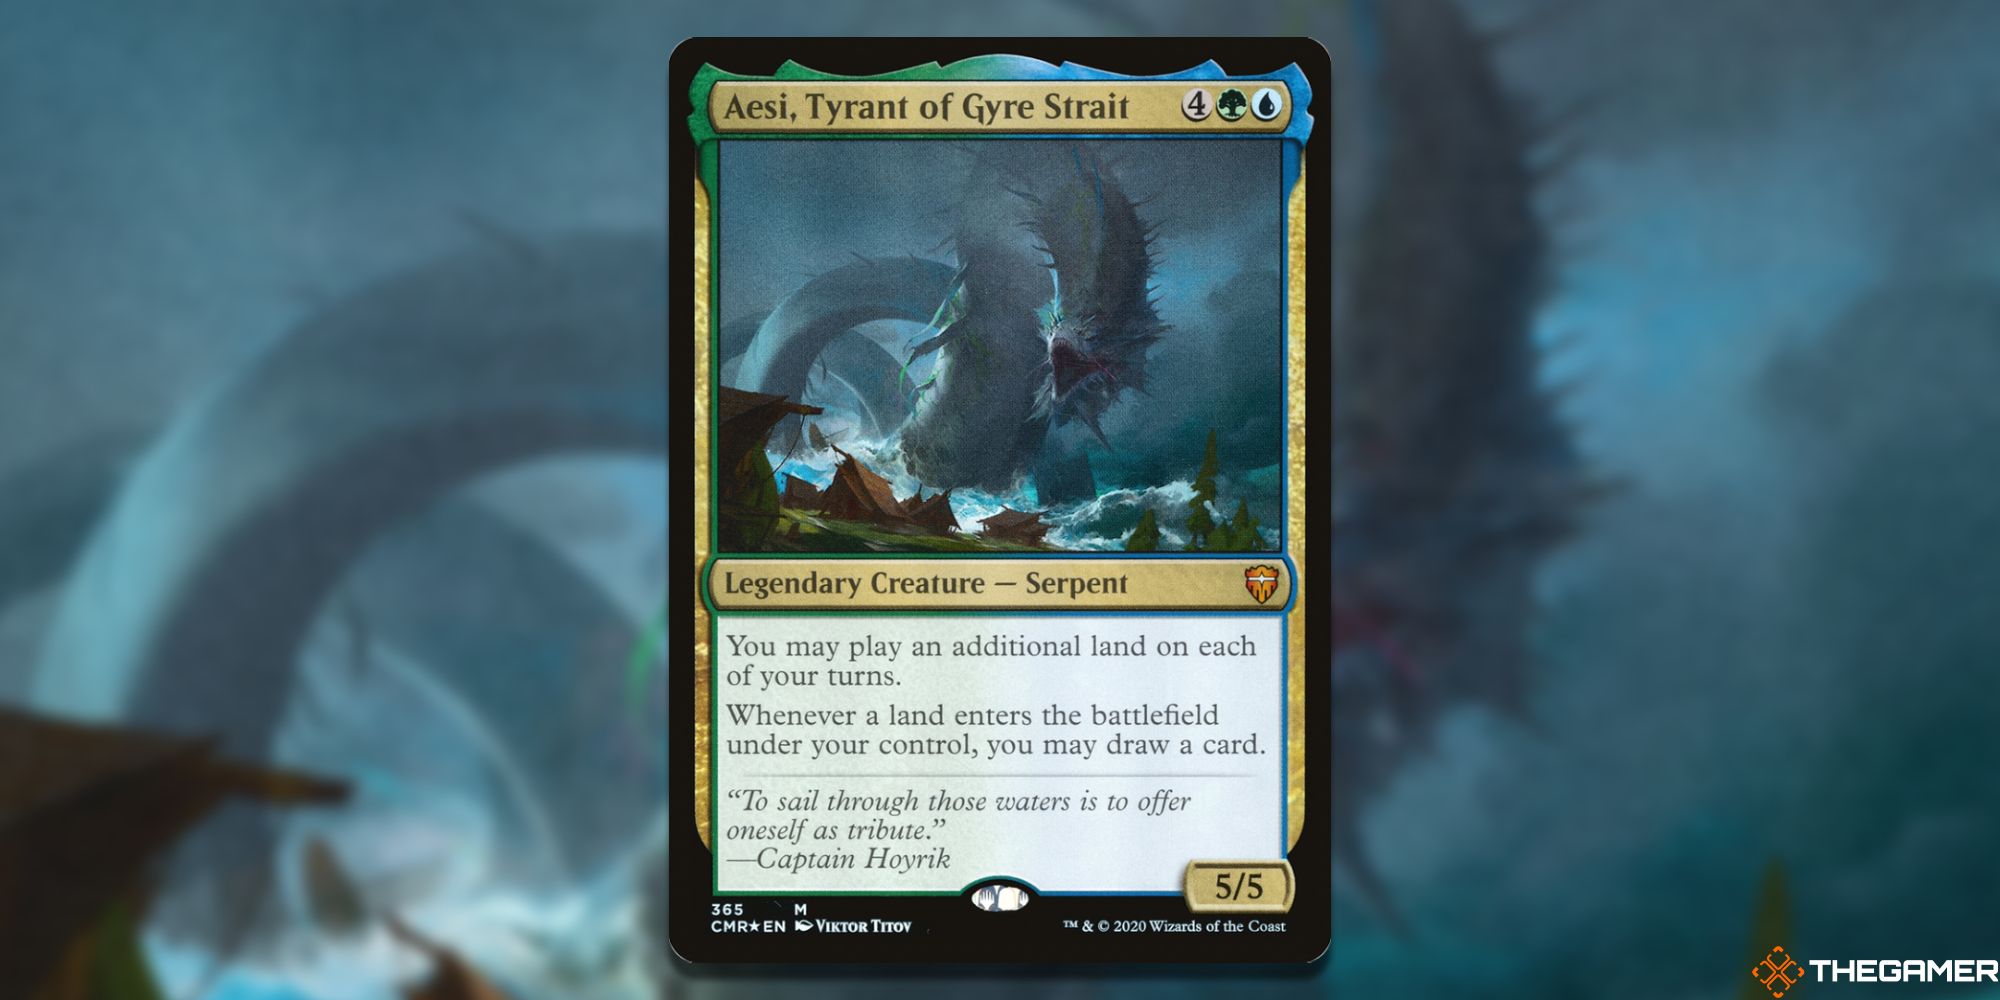 Image of the Aesi, Tyrant of Gyre Strait card in Magic: The Gathering, with art by Viktor Titov